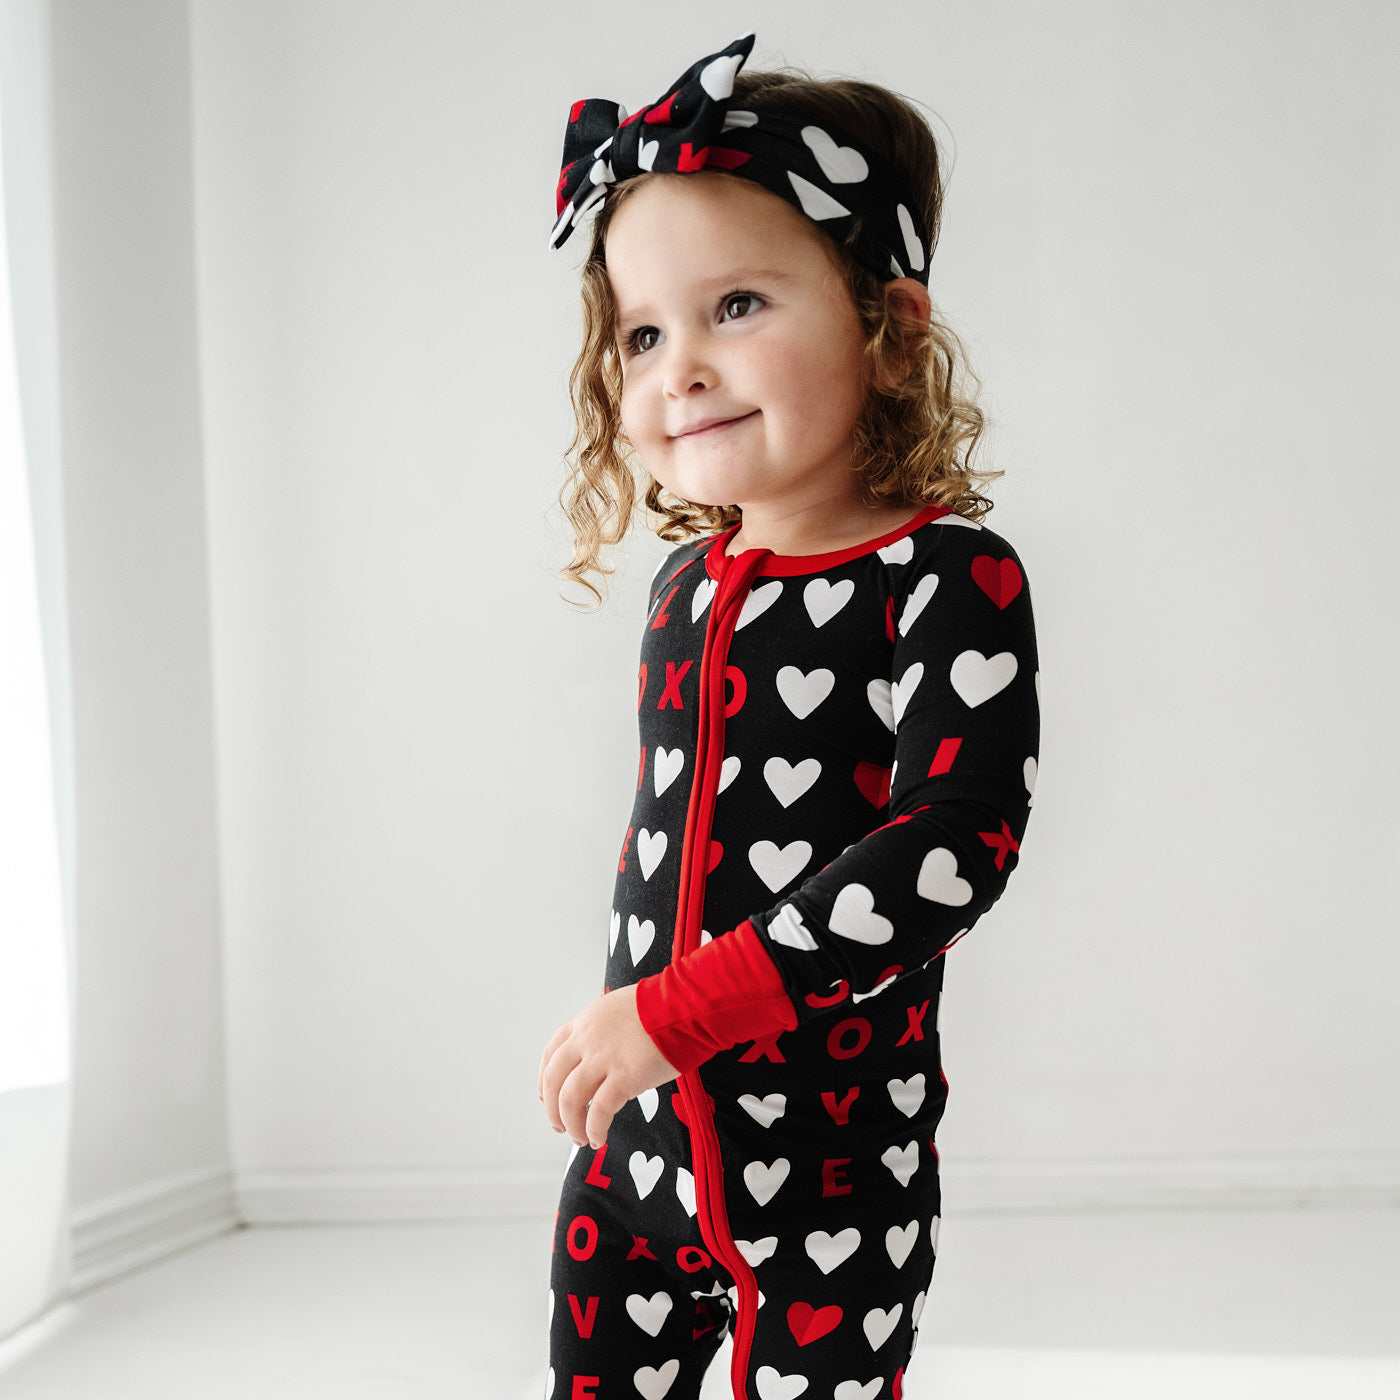 Close up image of a child posing wearing a Black XOXO zippy paired with a matching luxe bow headband